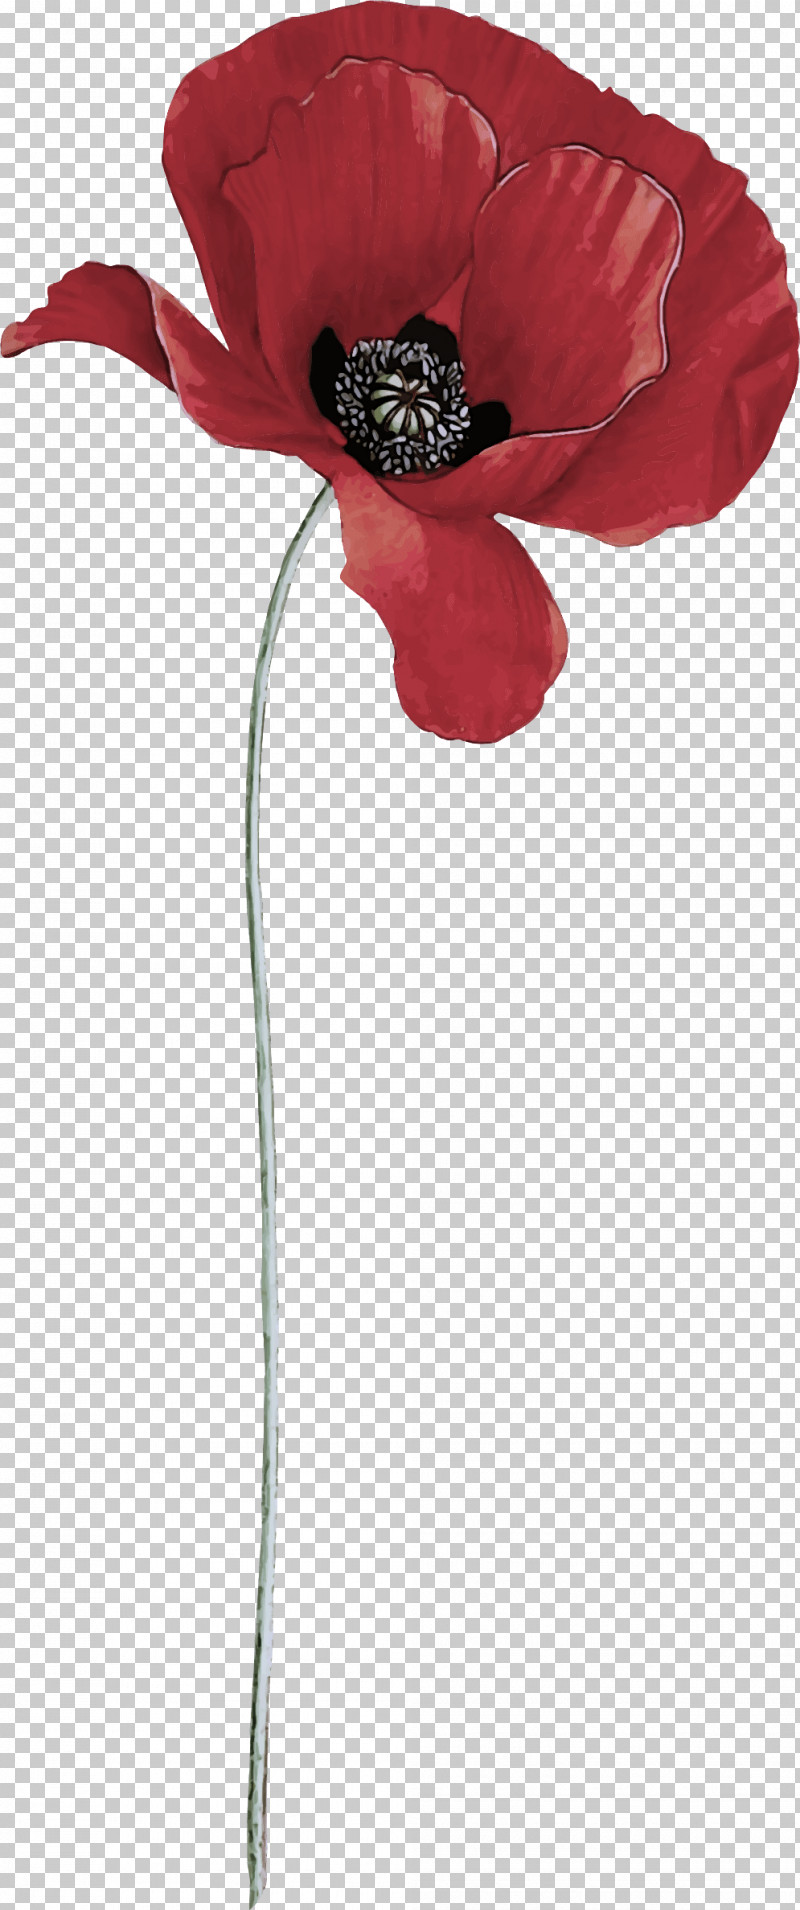 Red Flower Corn Poppy Coquelicot Plant PNG, Clipart, Anthurium, Coquelicot, Corn Poppy, Flower, Petal Free PNG Download